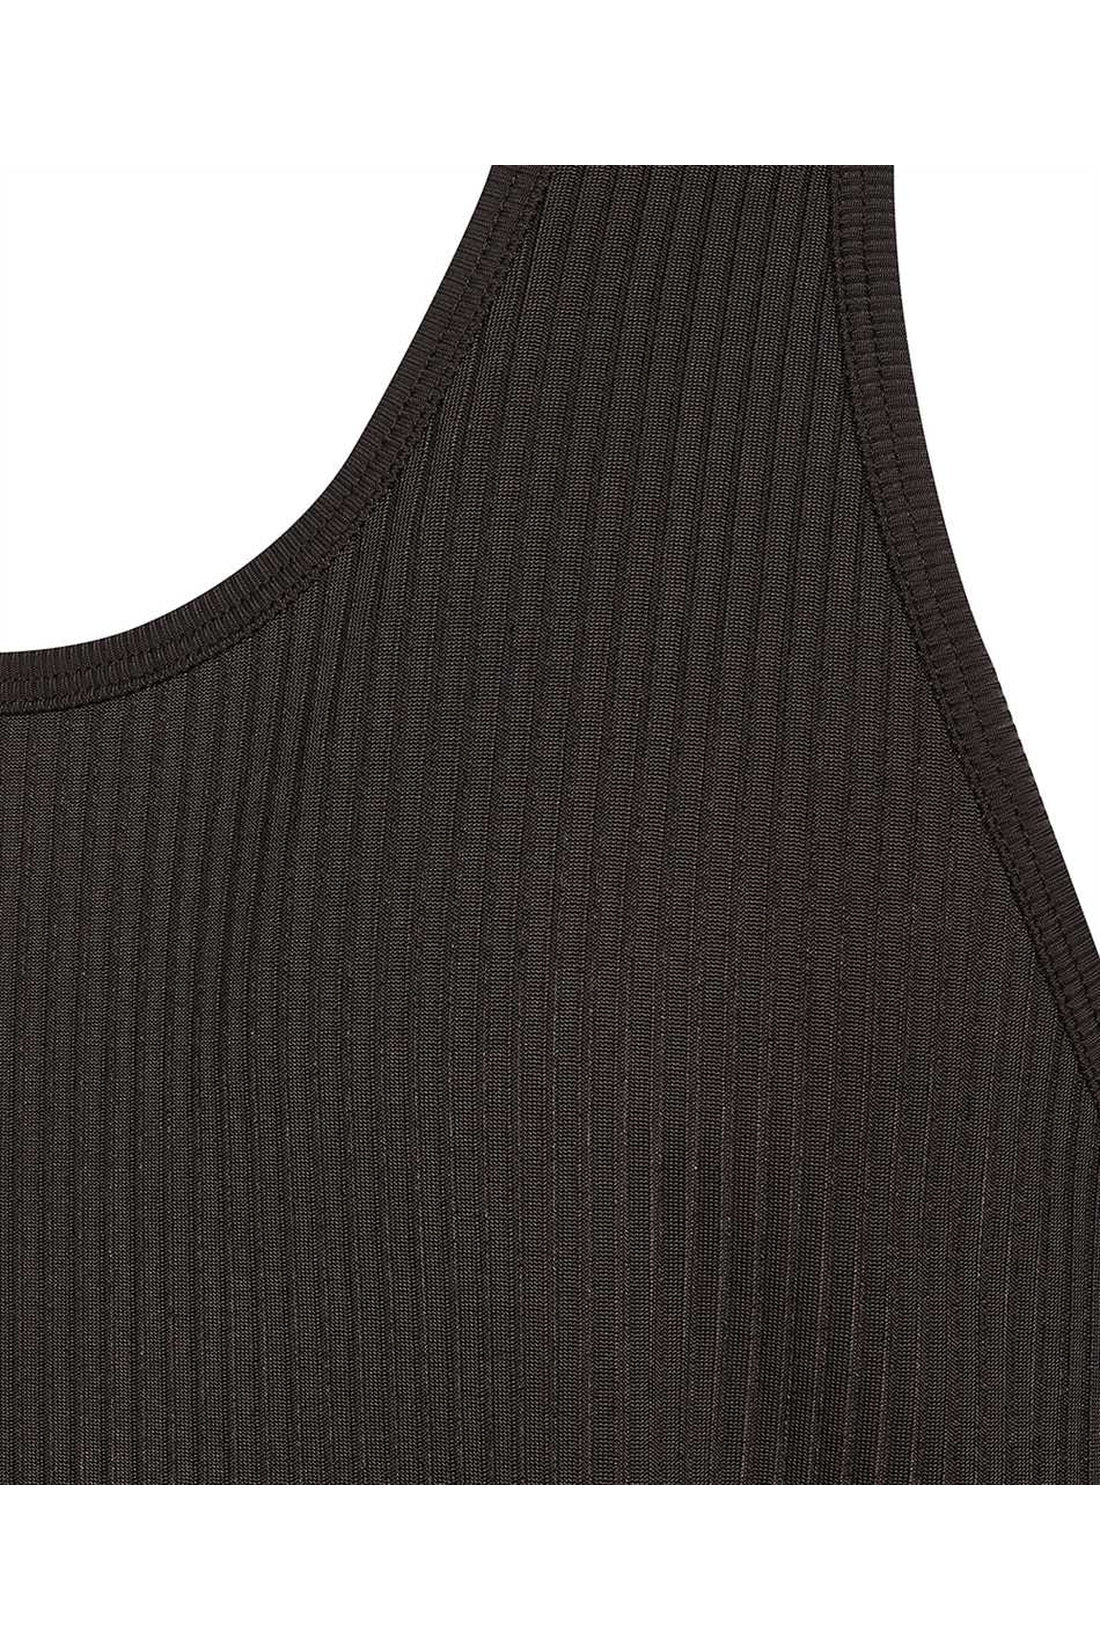 Tom Ford-OUTLET-SALE-Jersey tank-top-ARCHIVIST